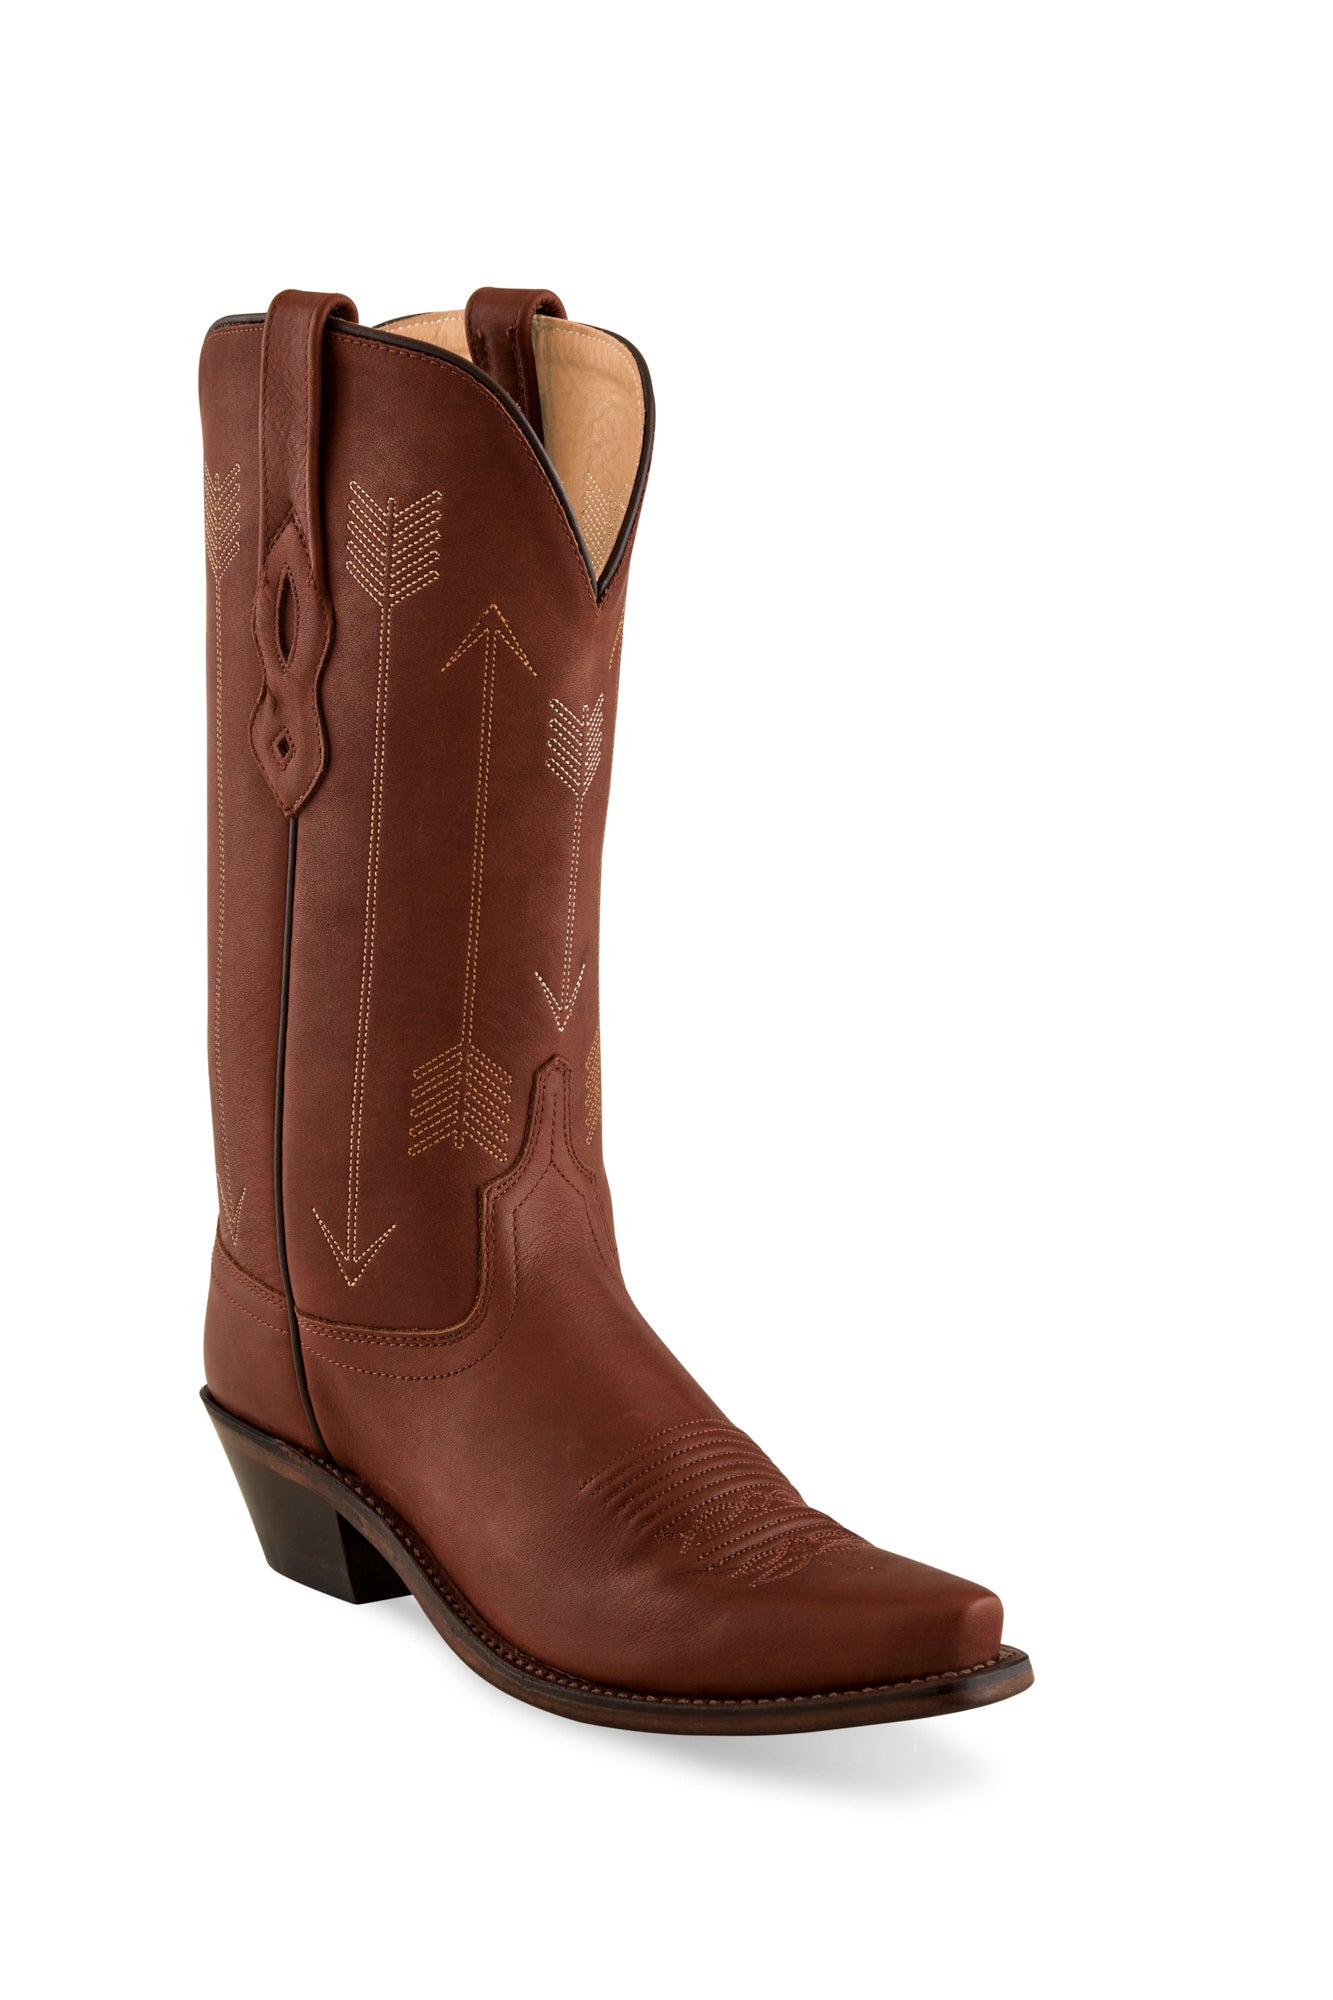 leather mens cowboy boots